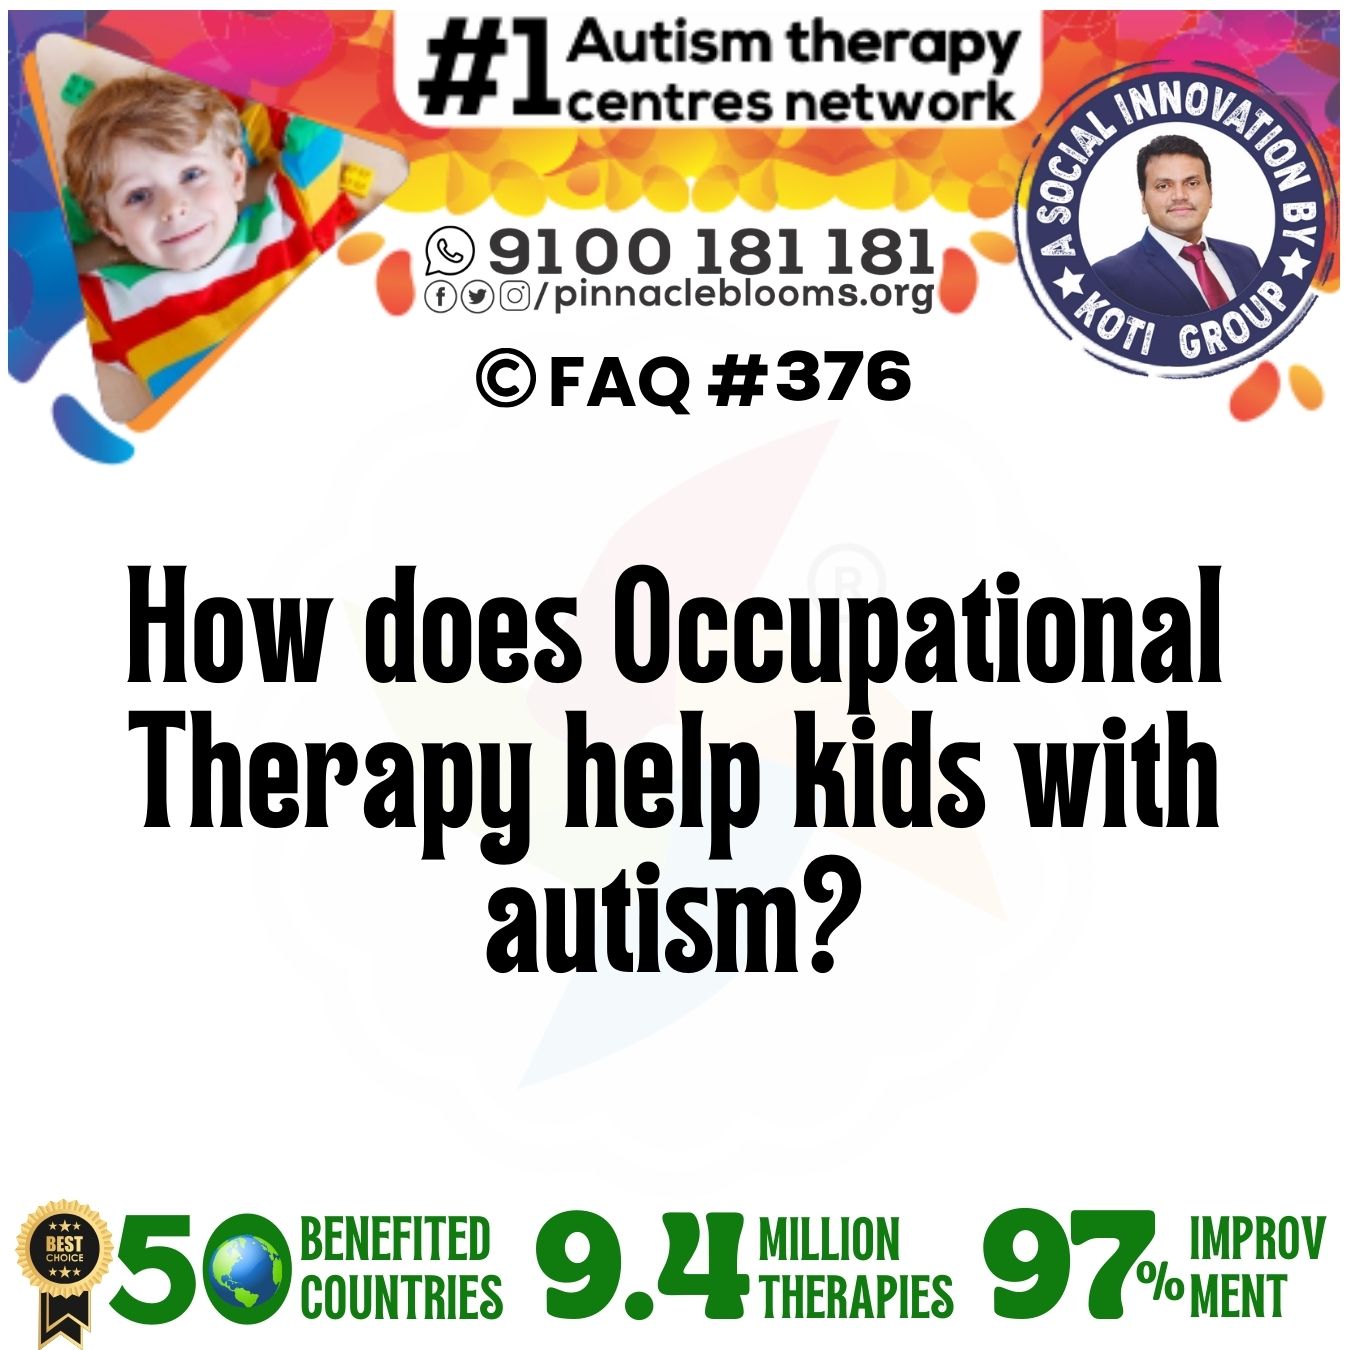 How does Occupational Therapy help kids with autism?